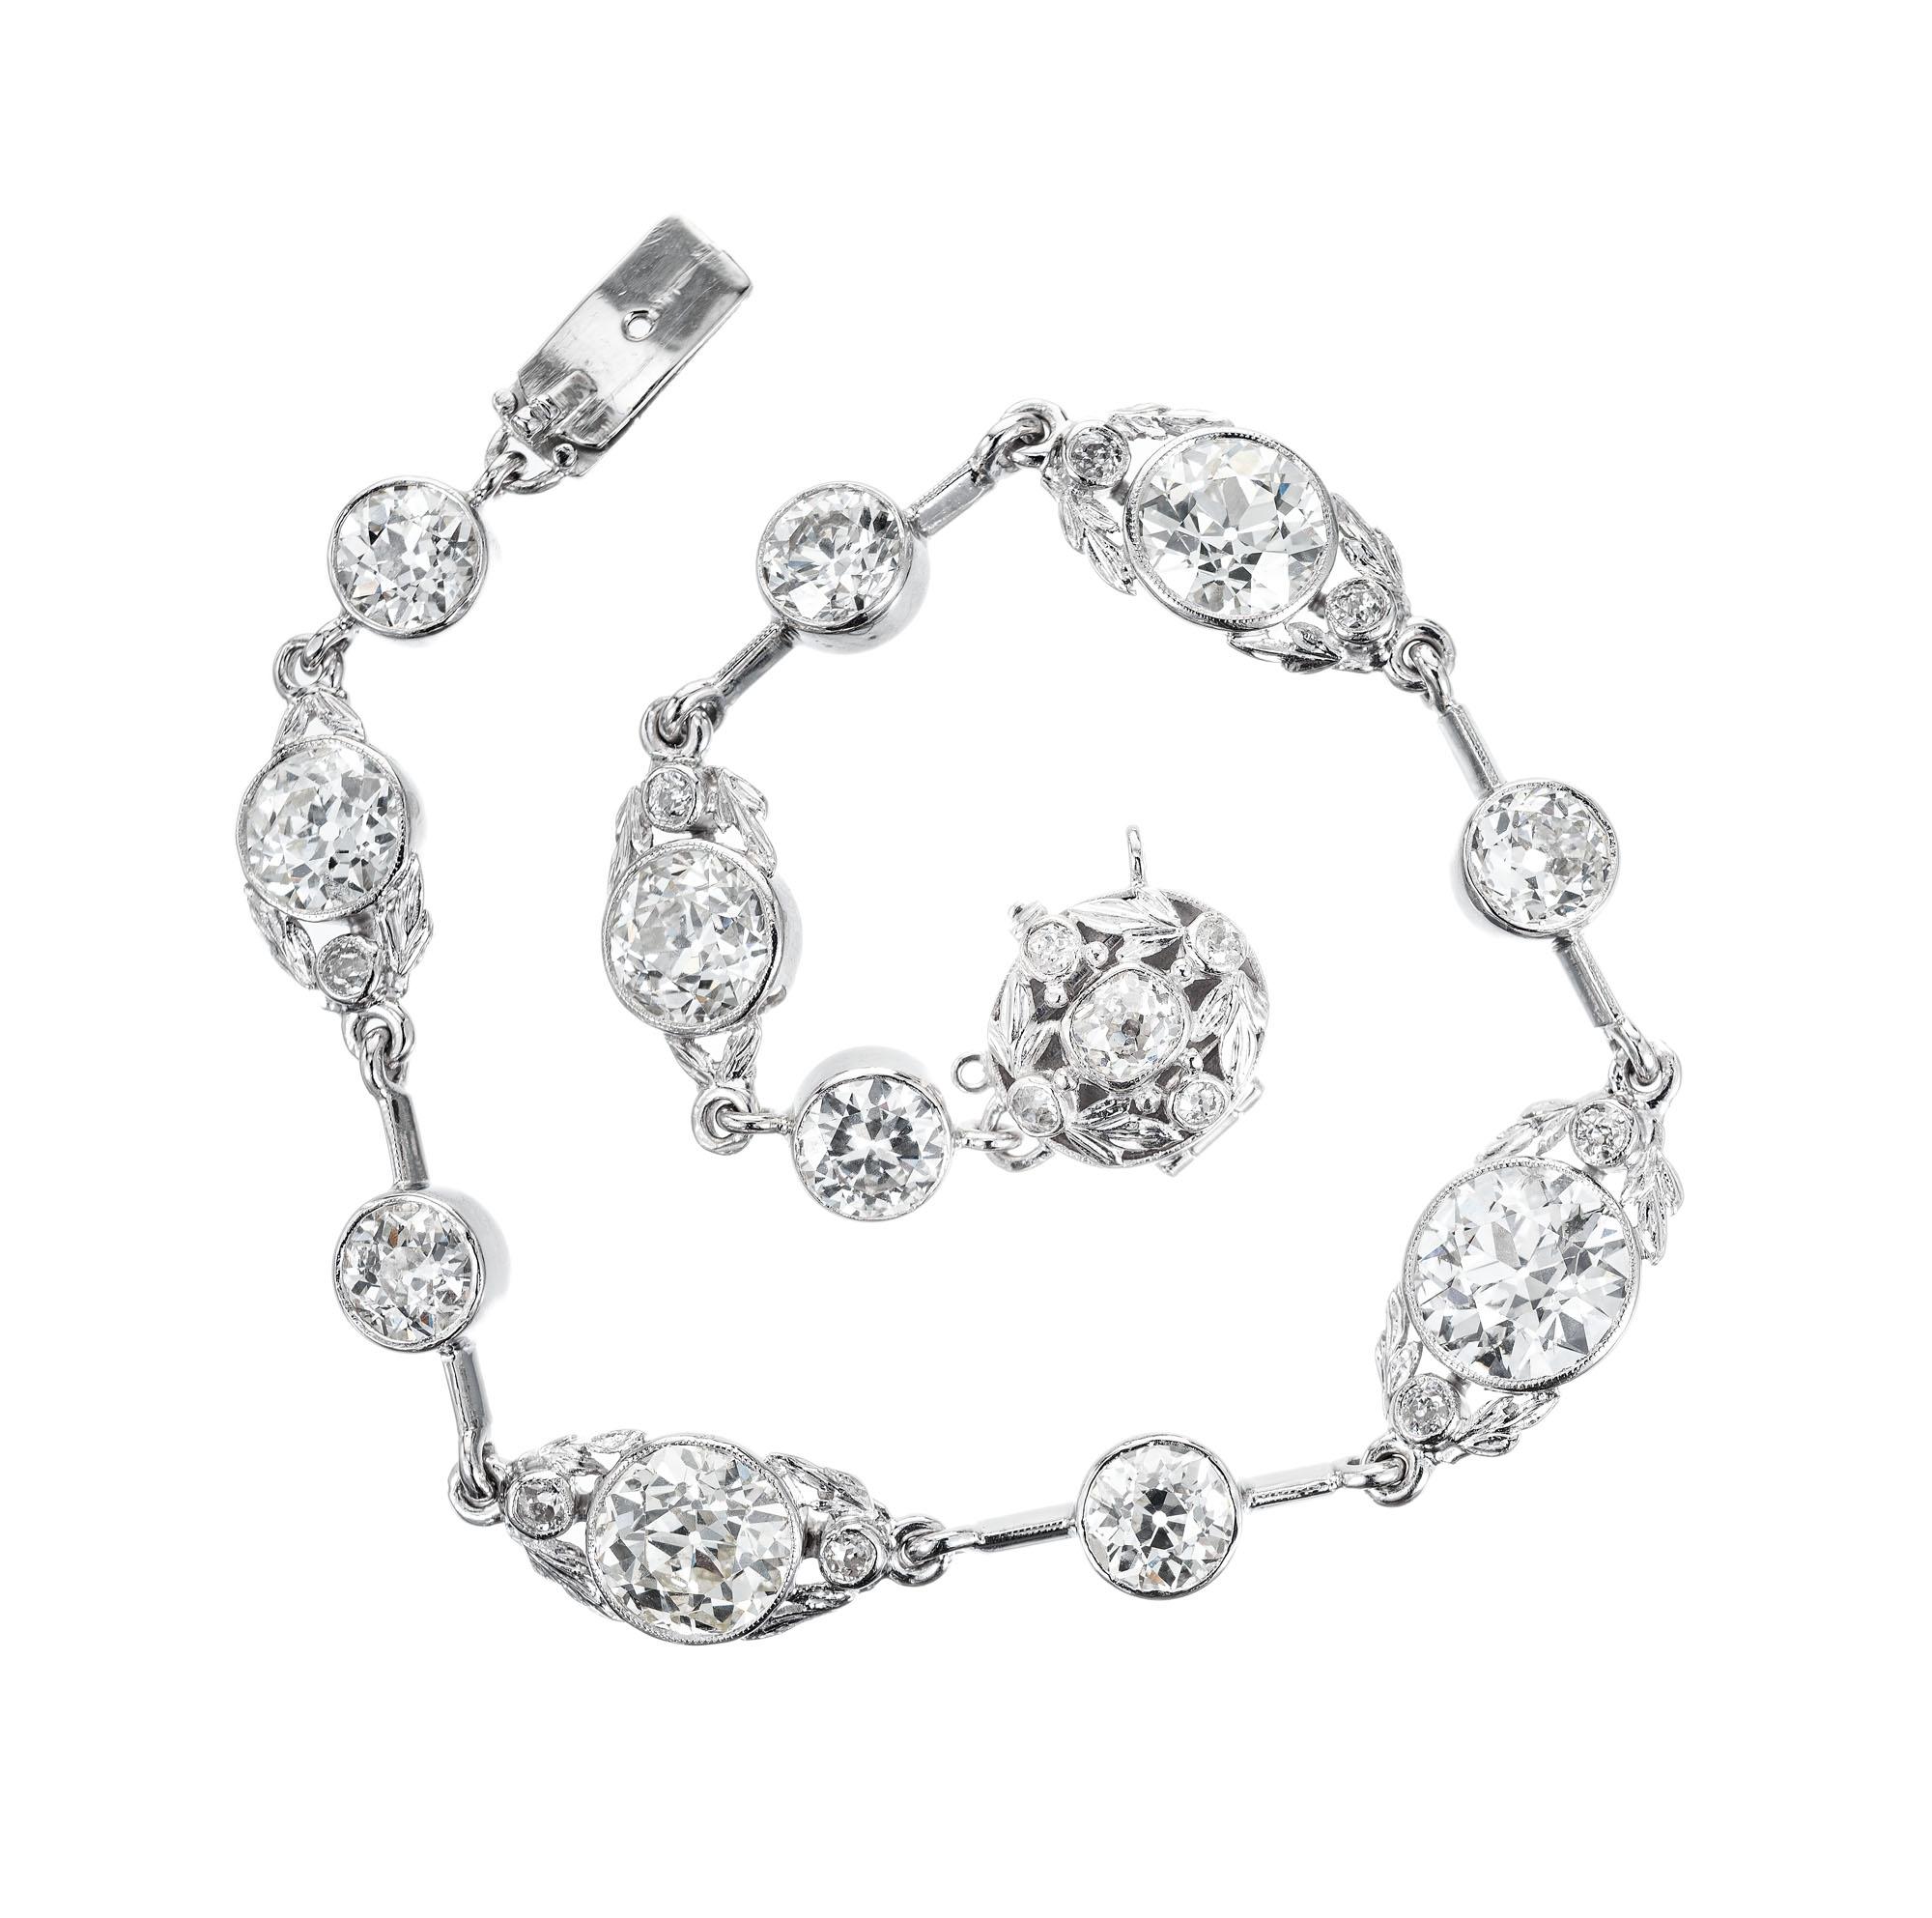 Antique 1890-1900 14.40ct diamond bracelet. Handmade in platinum with Ole Europpean, Old Mine and single cut diamonds, EGL certified. 7 inches long. 

11 Old European cut  H-J VS2- SI2 diamonds. Approximate 13.80 carats
1 Old Mine  Brilliant cut I-J